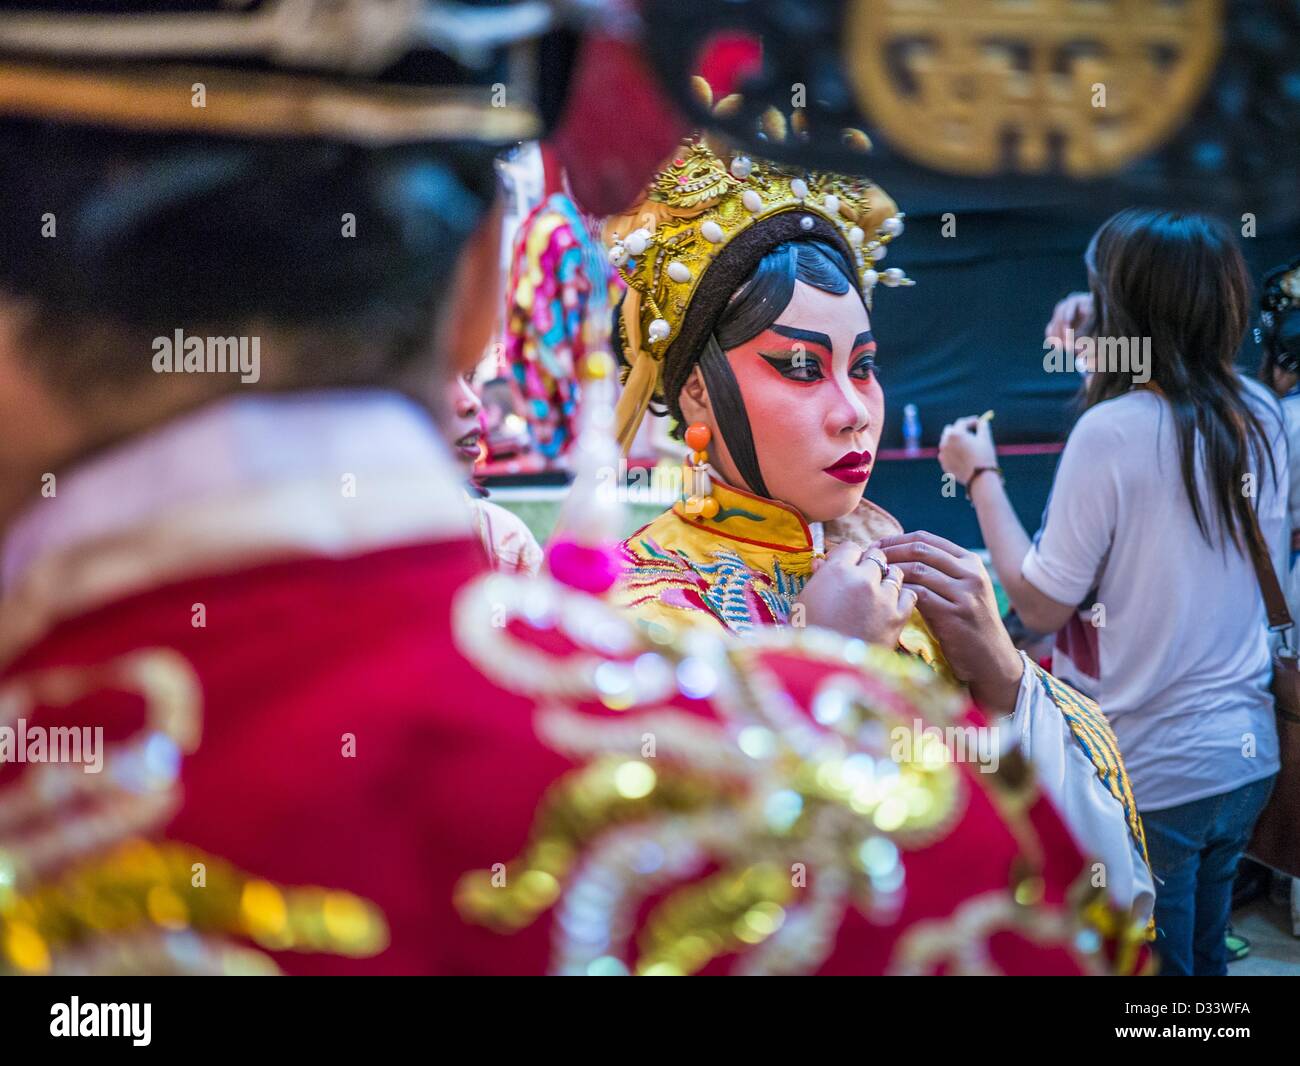 Bangkok, Thailand. 8th February 2013.  Chinese opera performers wait to go on stage for a Chinese New Year performance at Seacon Square in Bangkok. Chinese opera is popular in Thailand and is usually performed in the Teochew language. The weeks surrounding Chinese New Year are important for retailers in Thailand and many malls put on special promotions and events honoring Chinese culture, like Lion Dances or Chinese Opera. Credit:  ZUMA Press, Inc. / Alamy Live News Stock Photo